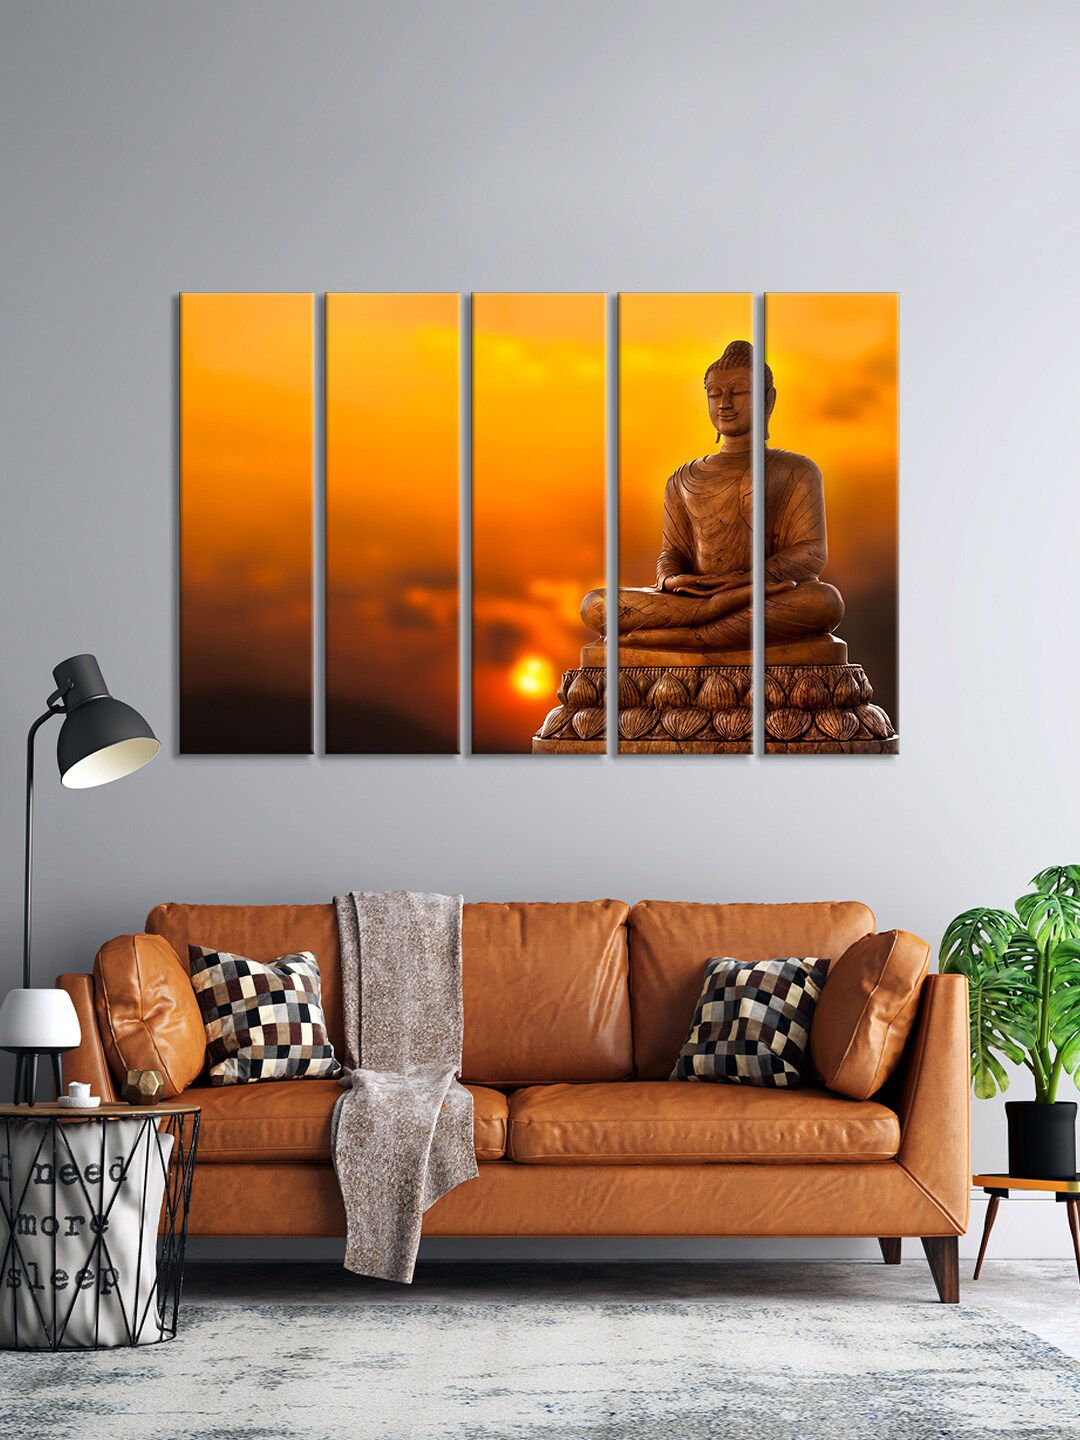 999Store Set Of 5 Gold-Toned & Orange Buddha Sitting In Medit With Golden Leaves Wall Art Frames Price in India